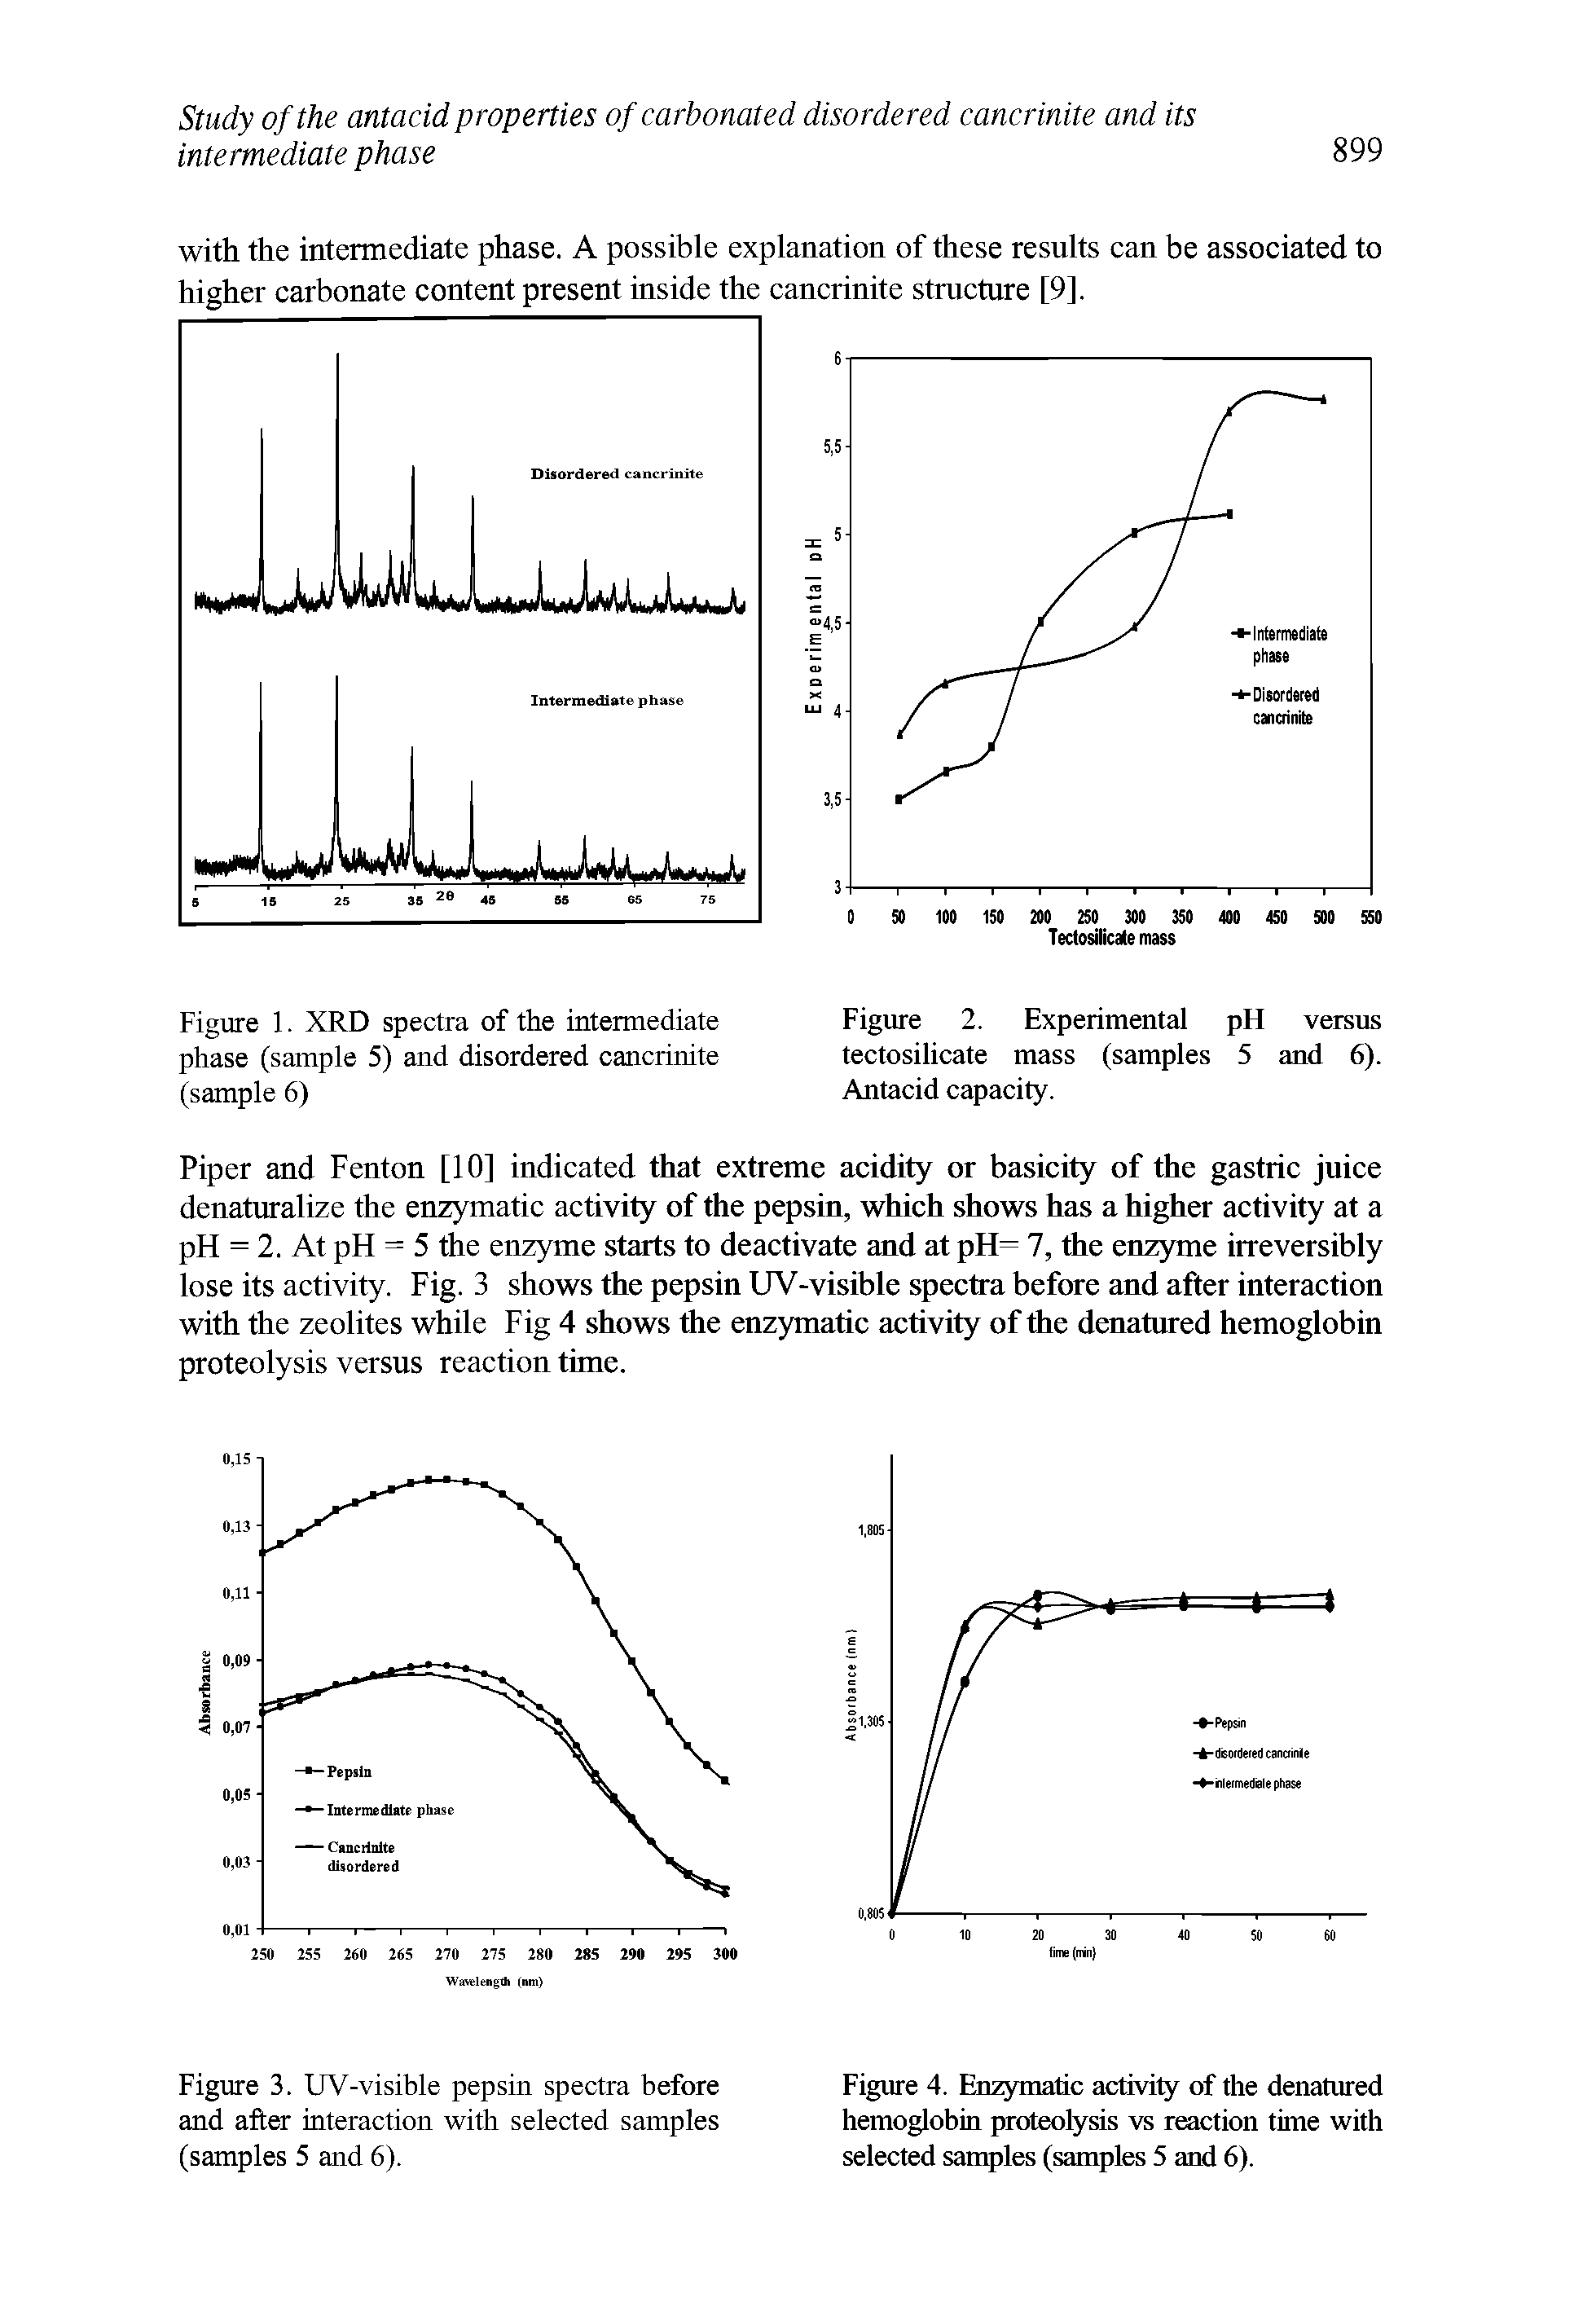 Figure 4. Enzymatic activity of the denatured hemoglobin proteolysis vs reaction time with selected samples (samples 5 and 6).